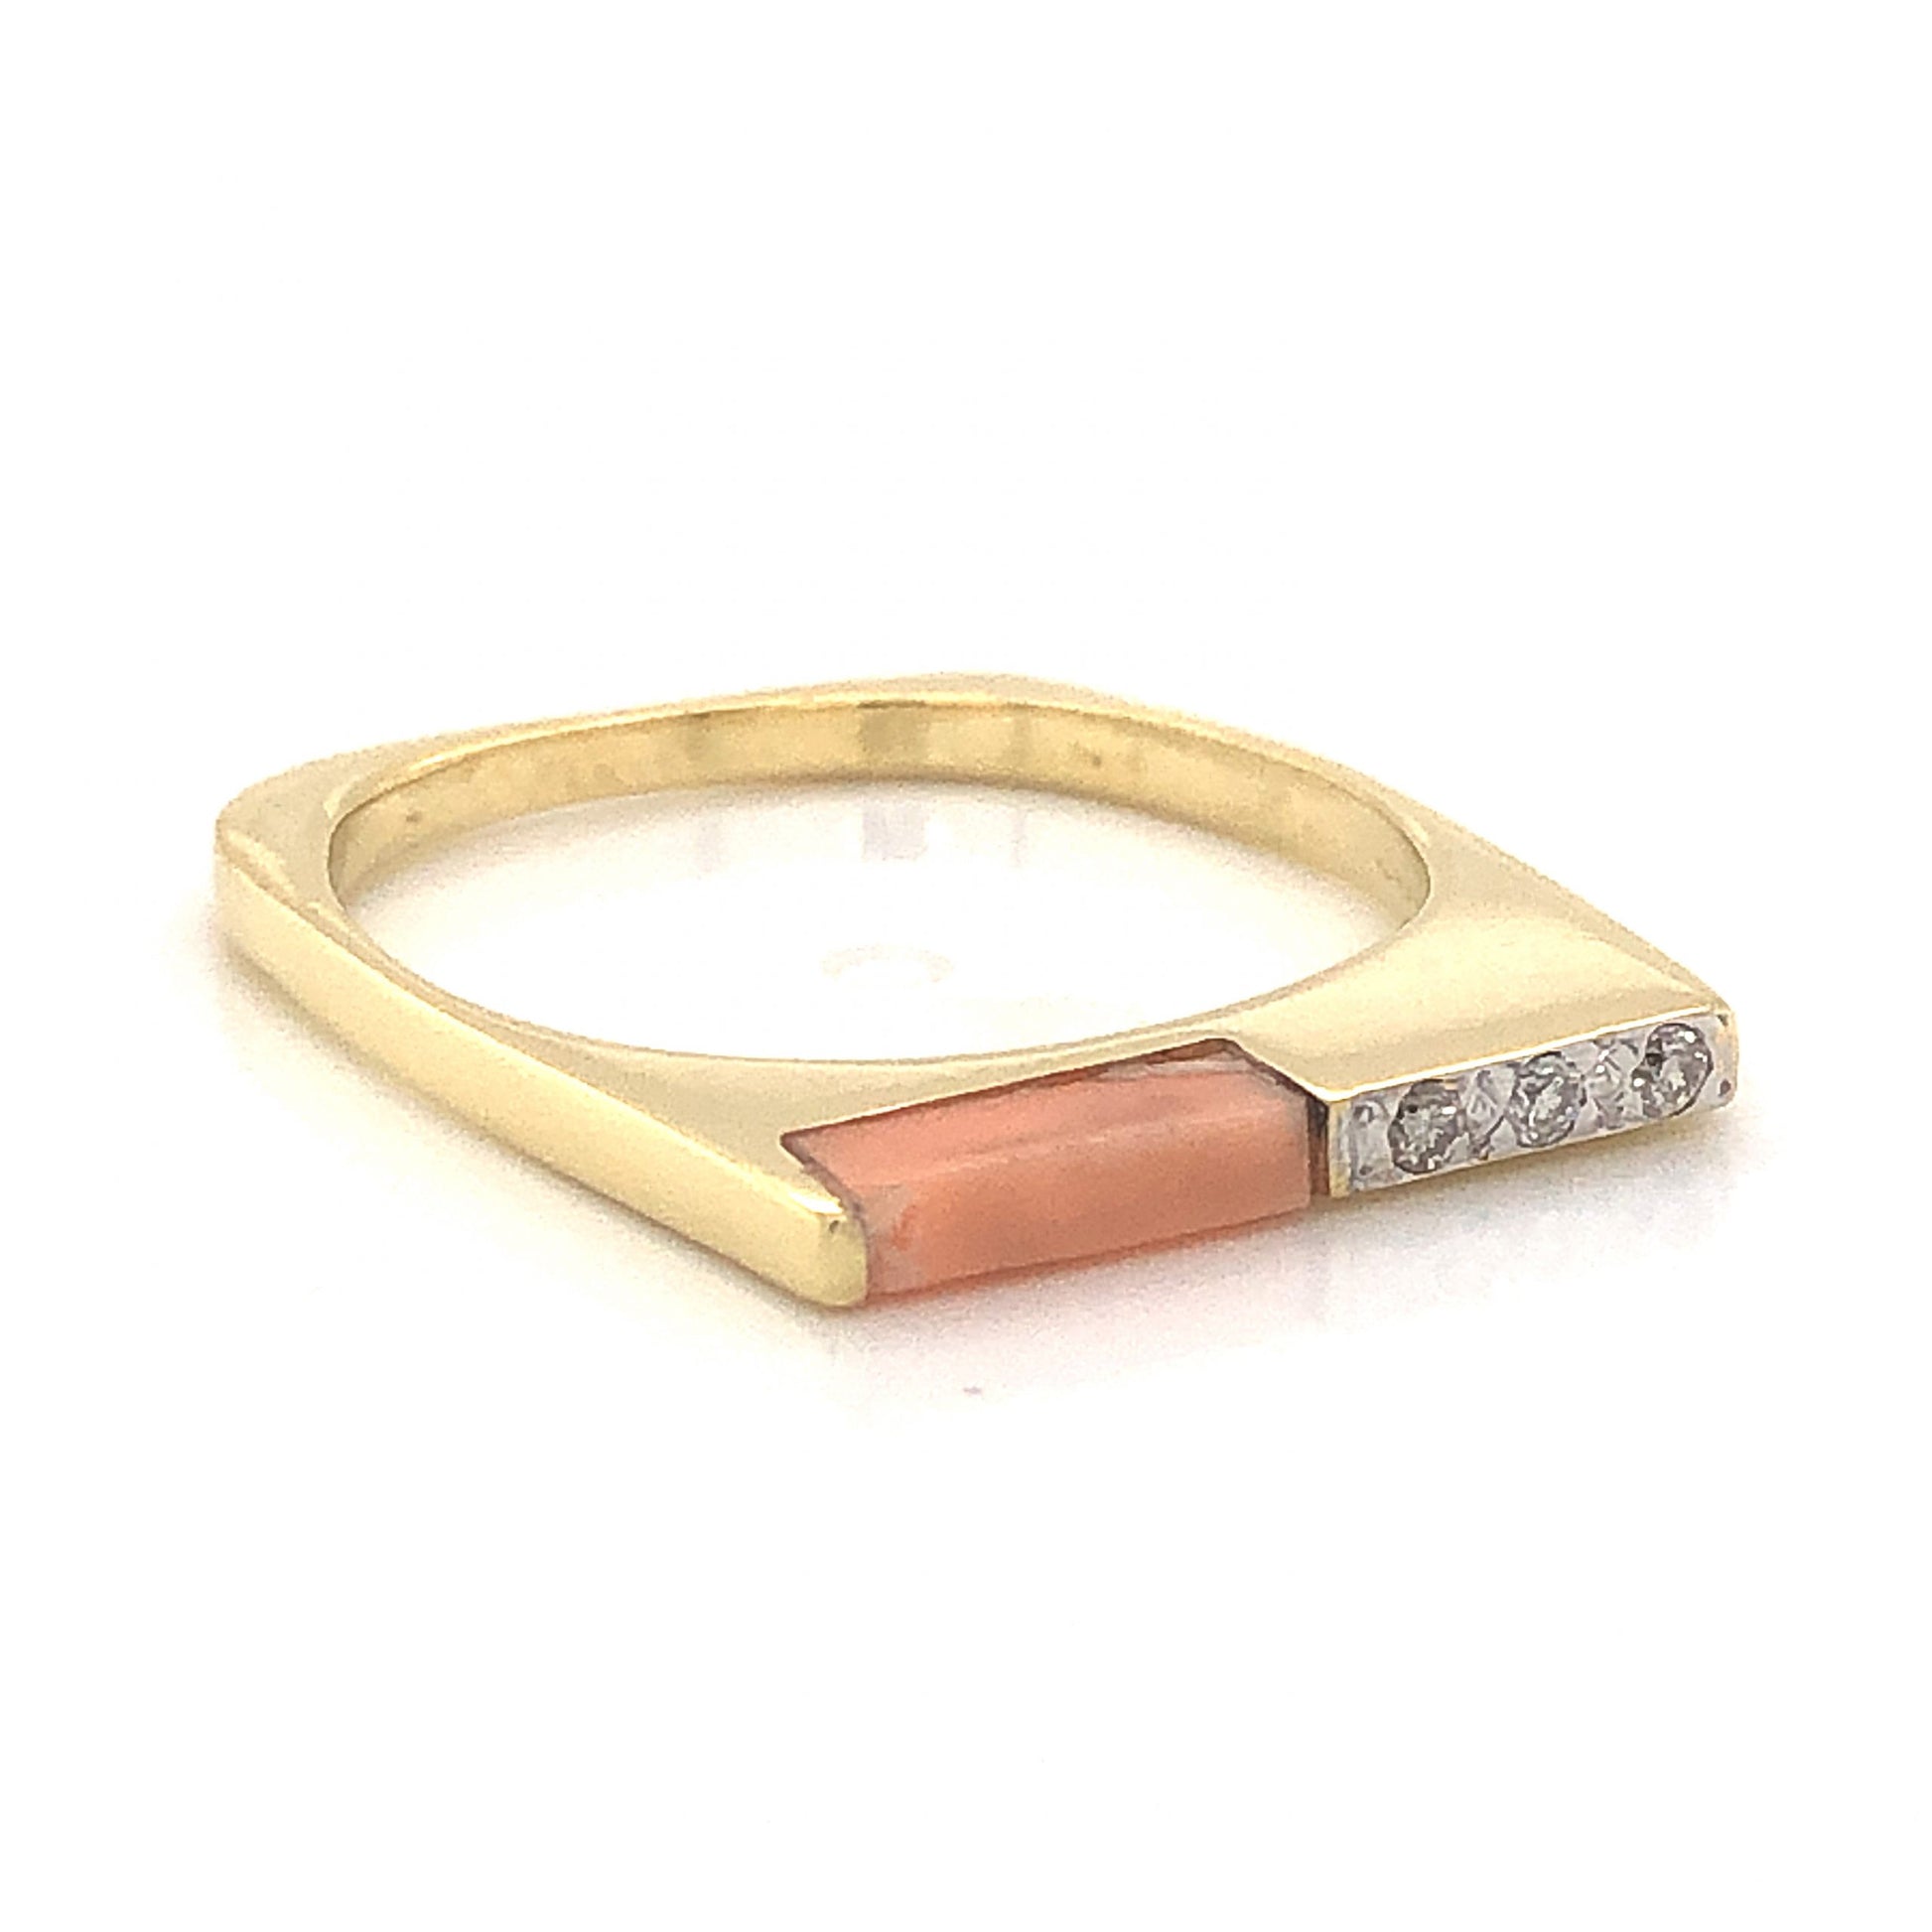 Mid-Century Thin Coral & Diamond Ring in 18k Yellow GoldComposition: PlatinumRing Size: 6Total Diamond Weight: .045 ctTotal Gram Weight: 2.7 gInscription: 18k 